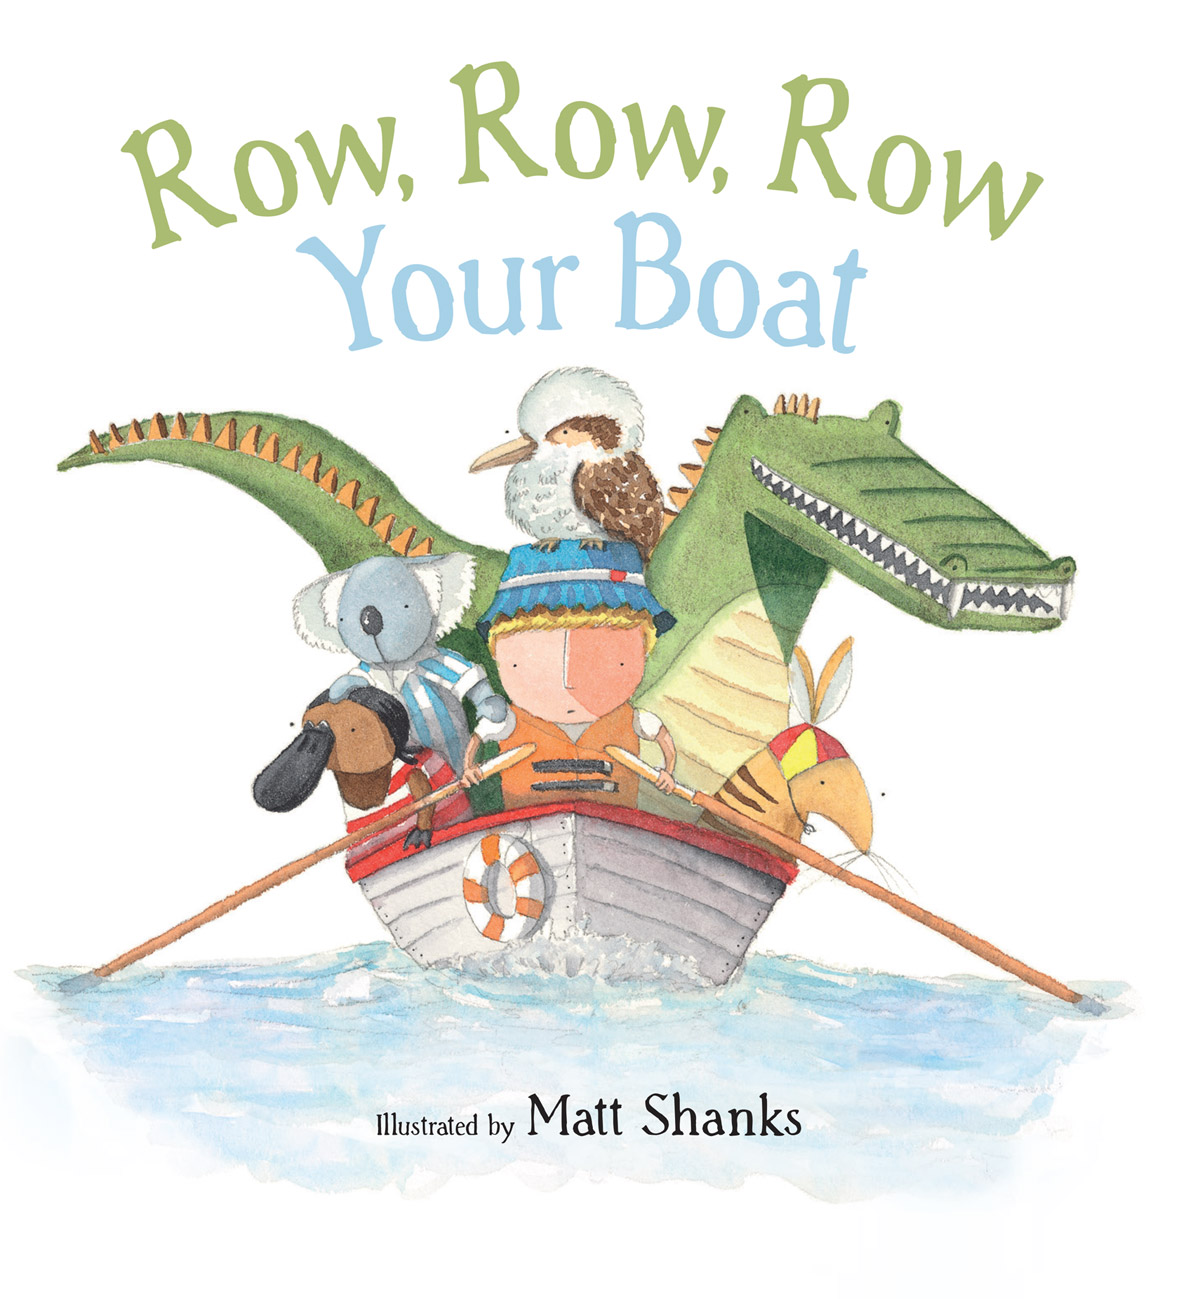 The cover for the picture book, Row Row Row Your Boat by Matt Shanks